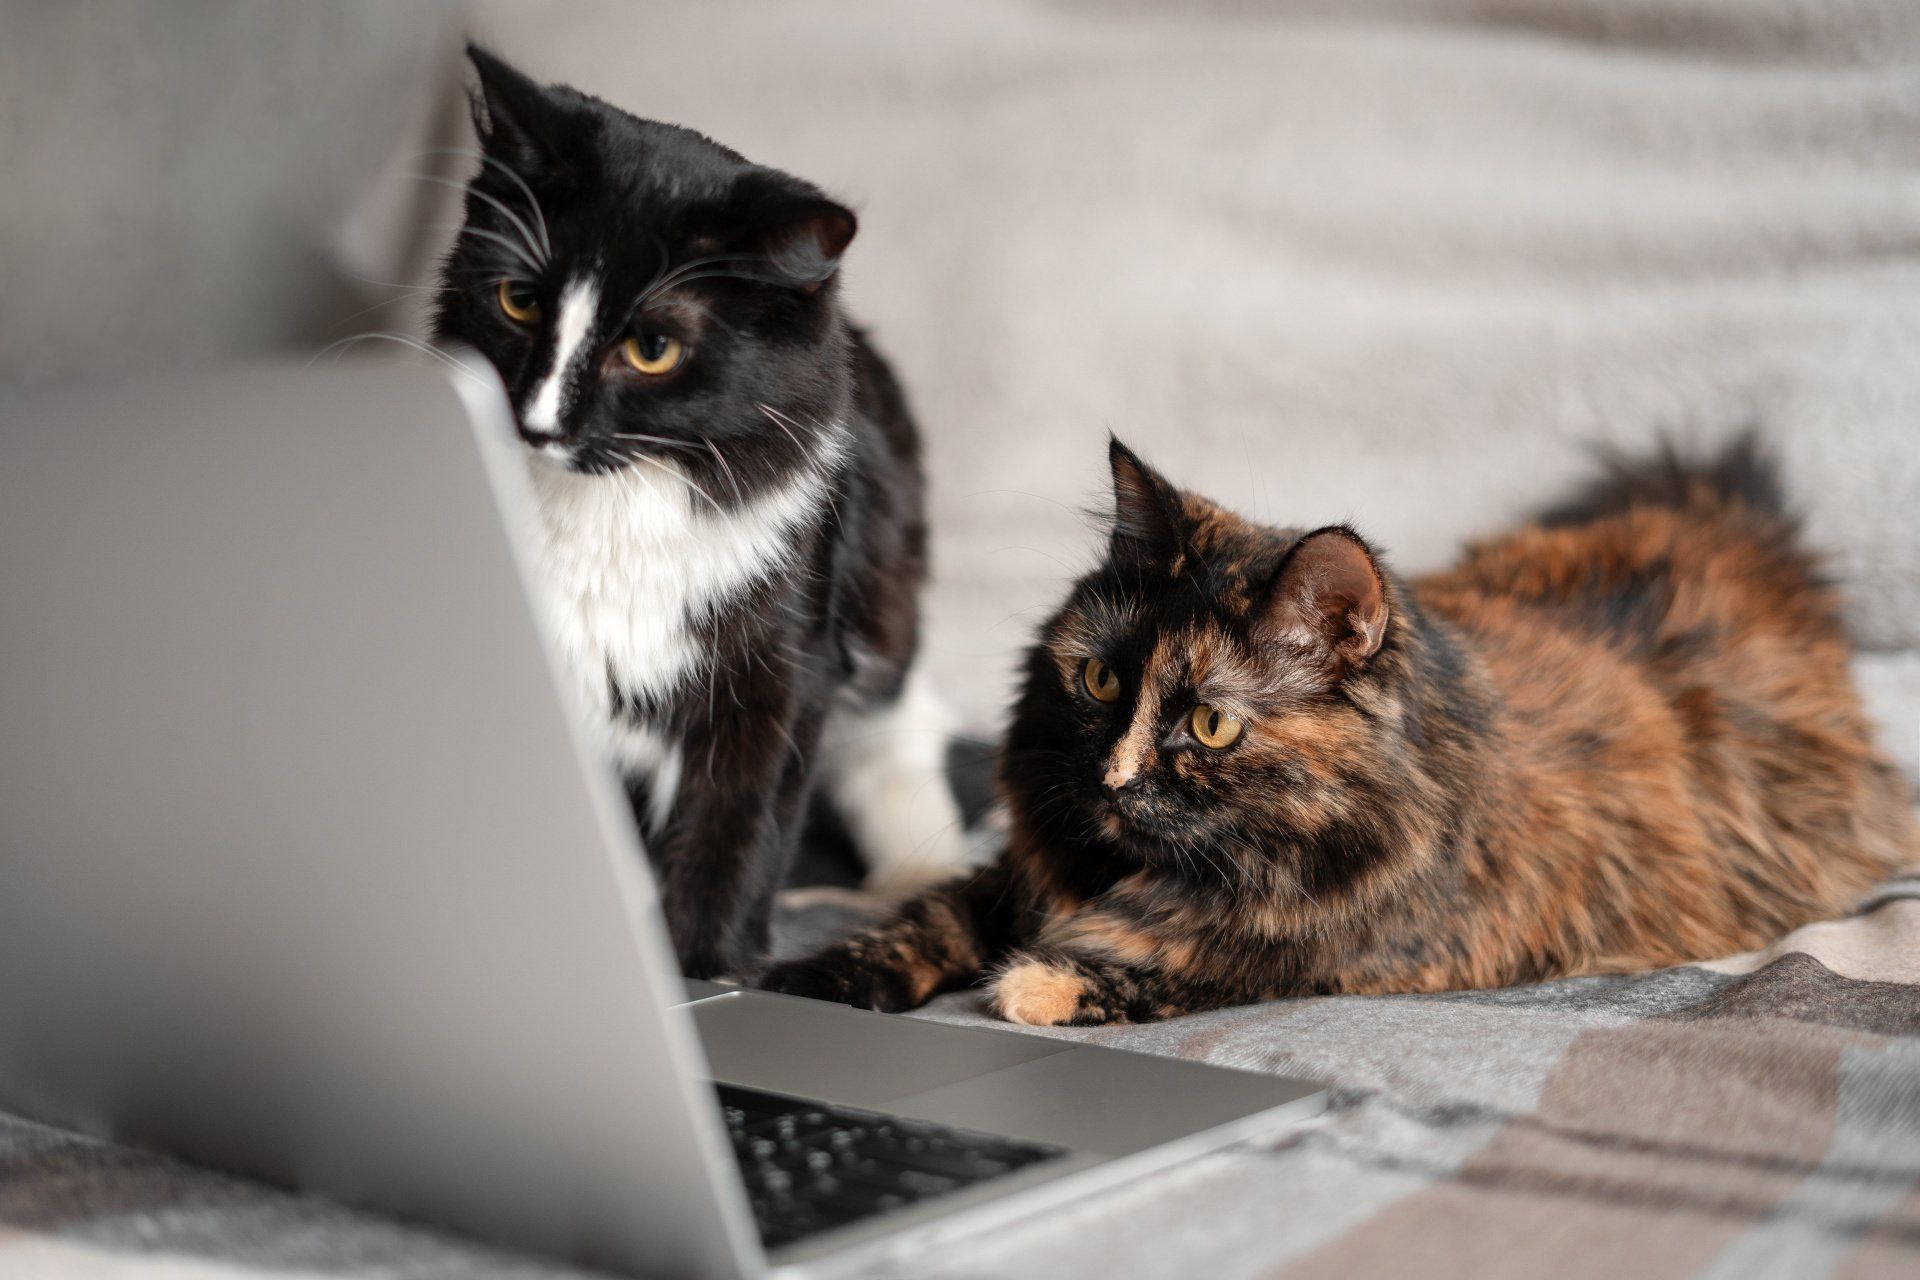 Two cats lying in front of the laptop and looking at the screen